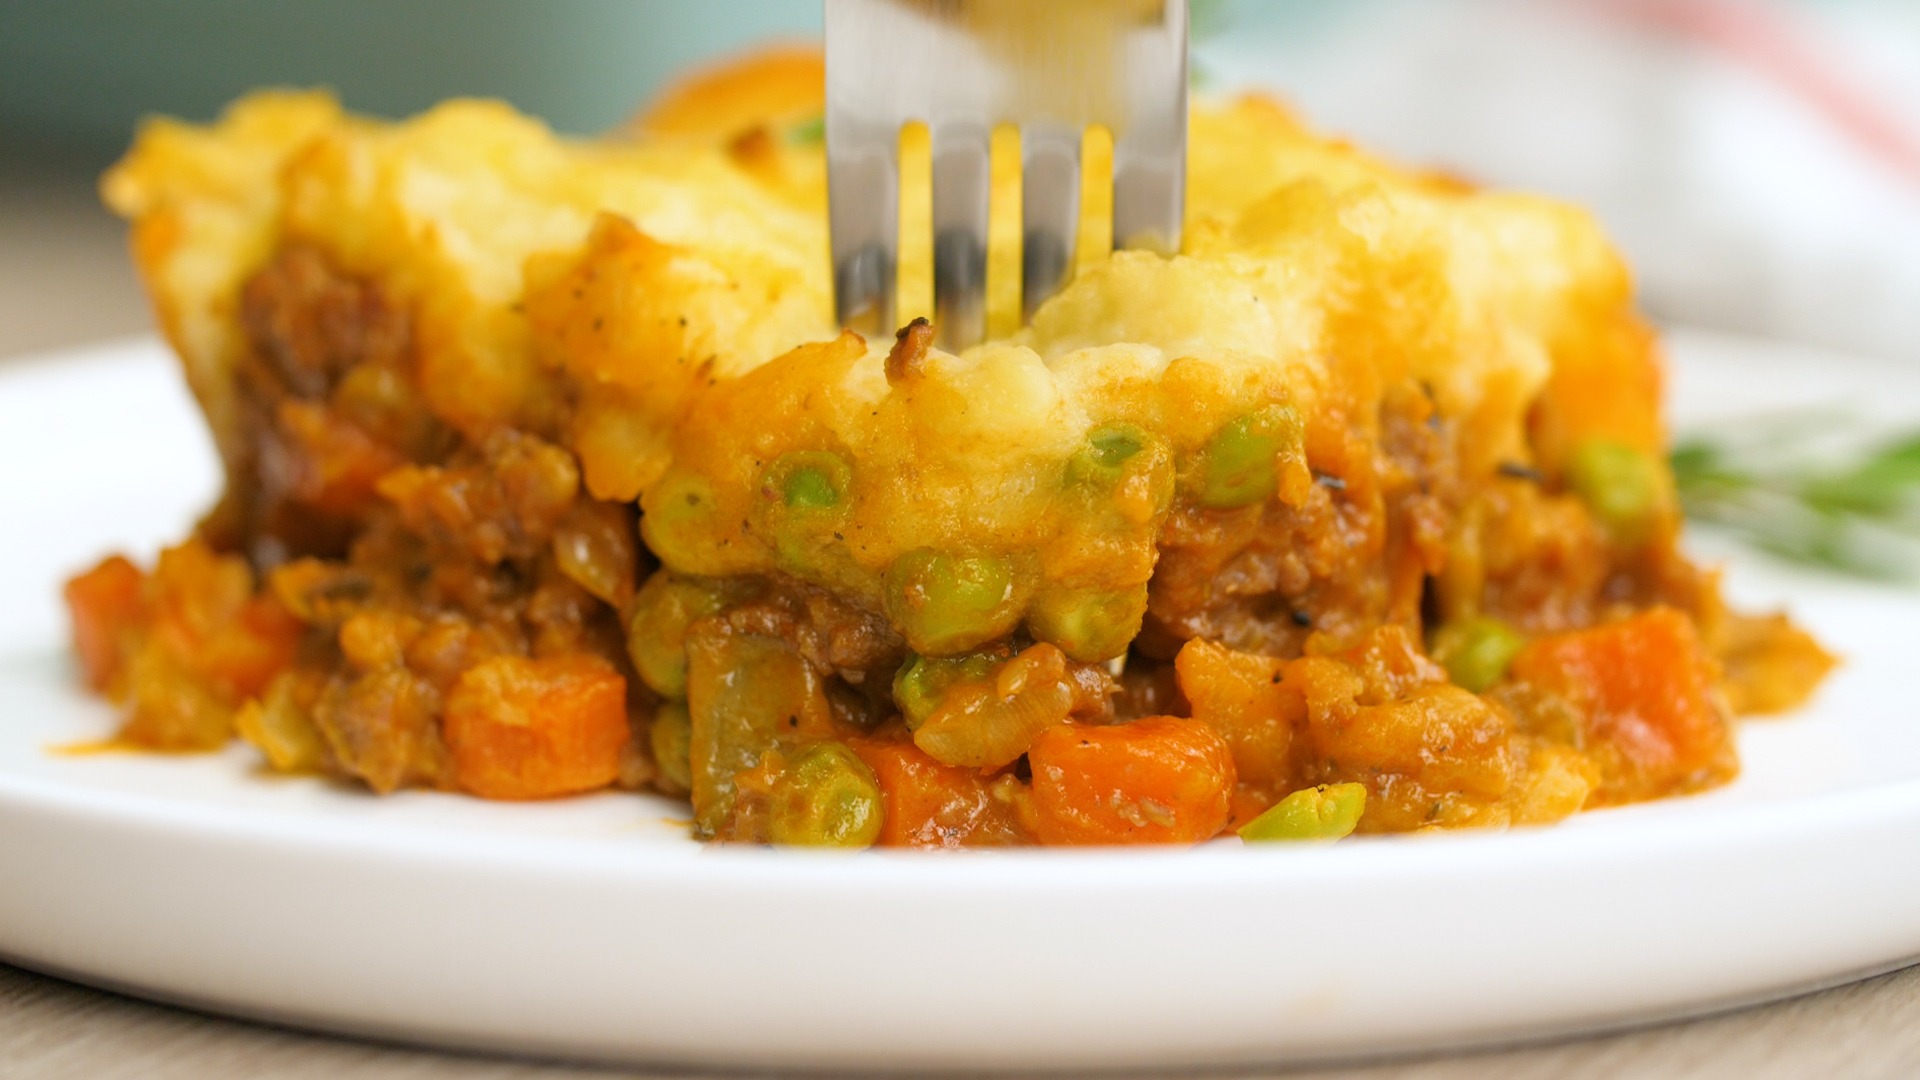 A front view of some shepherd's pie, with the ground lamb filling, and vegetables and potato layer, a fork sticking in the top